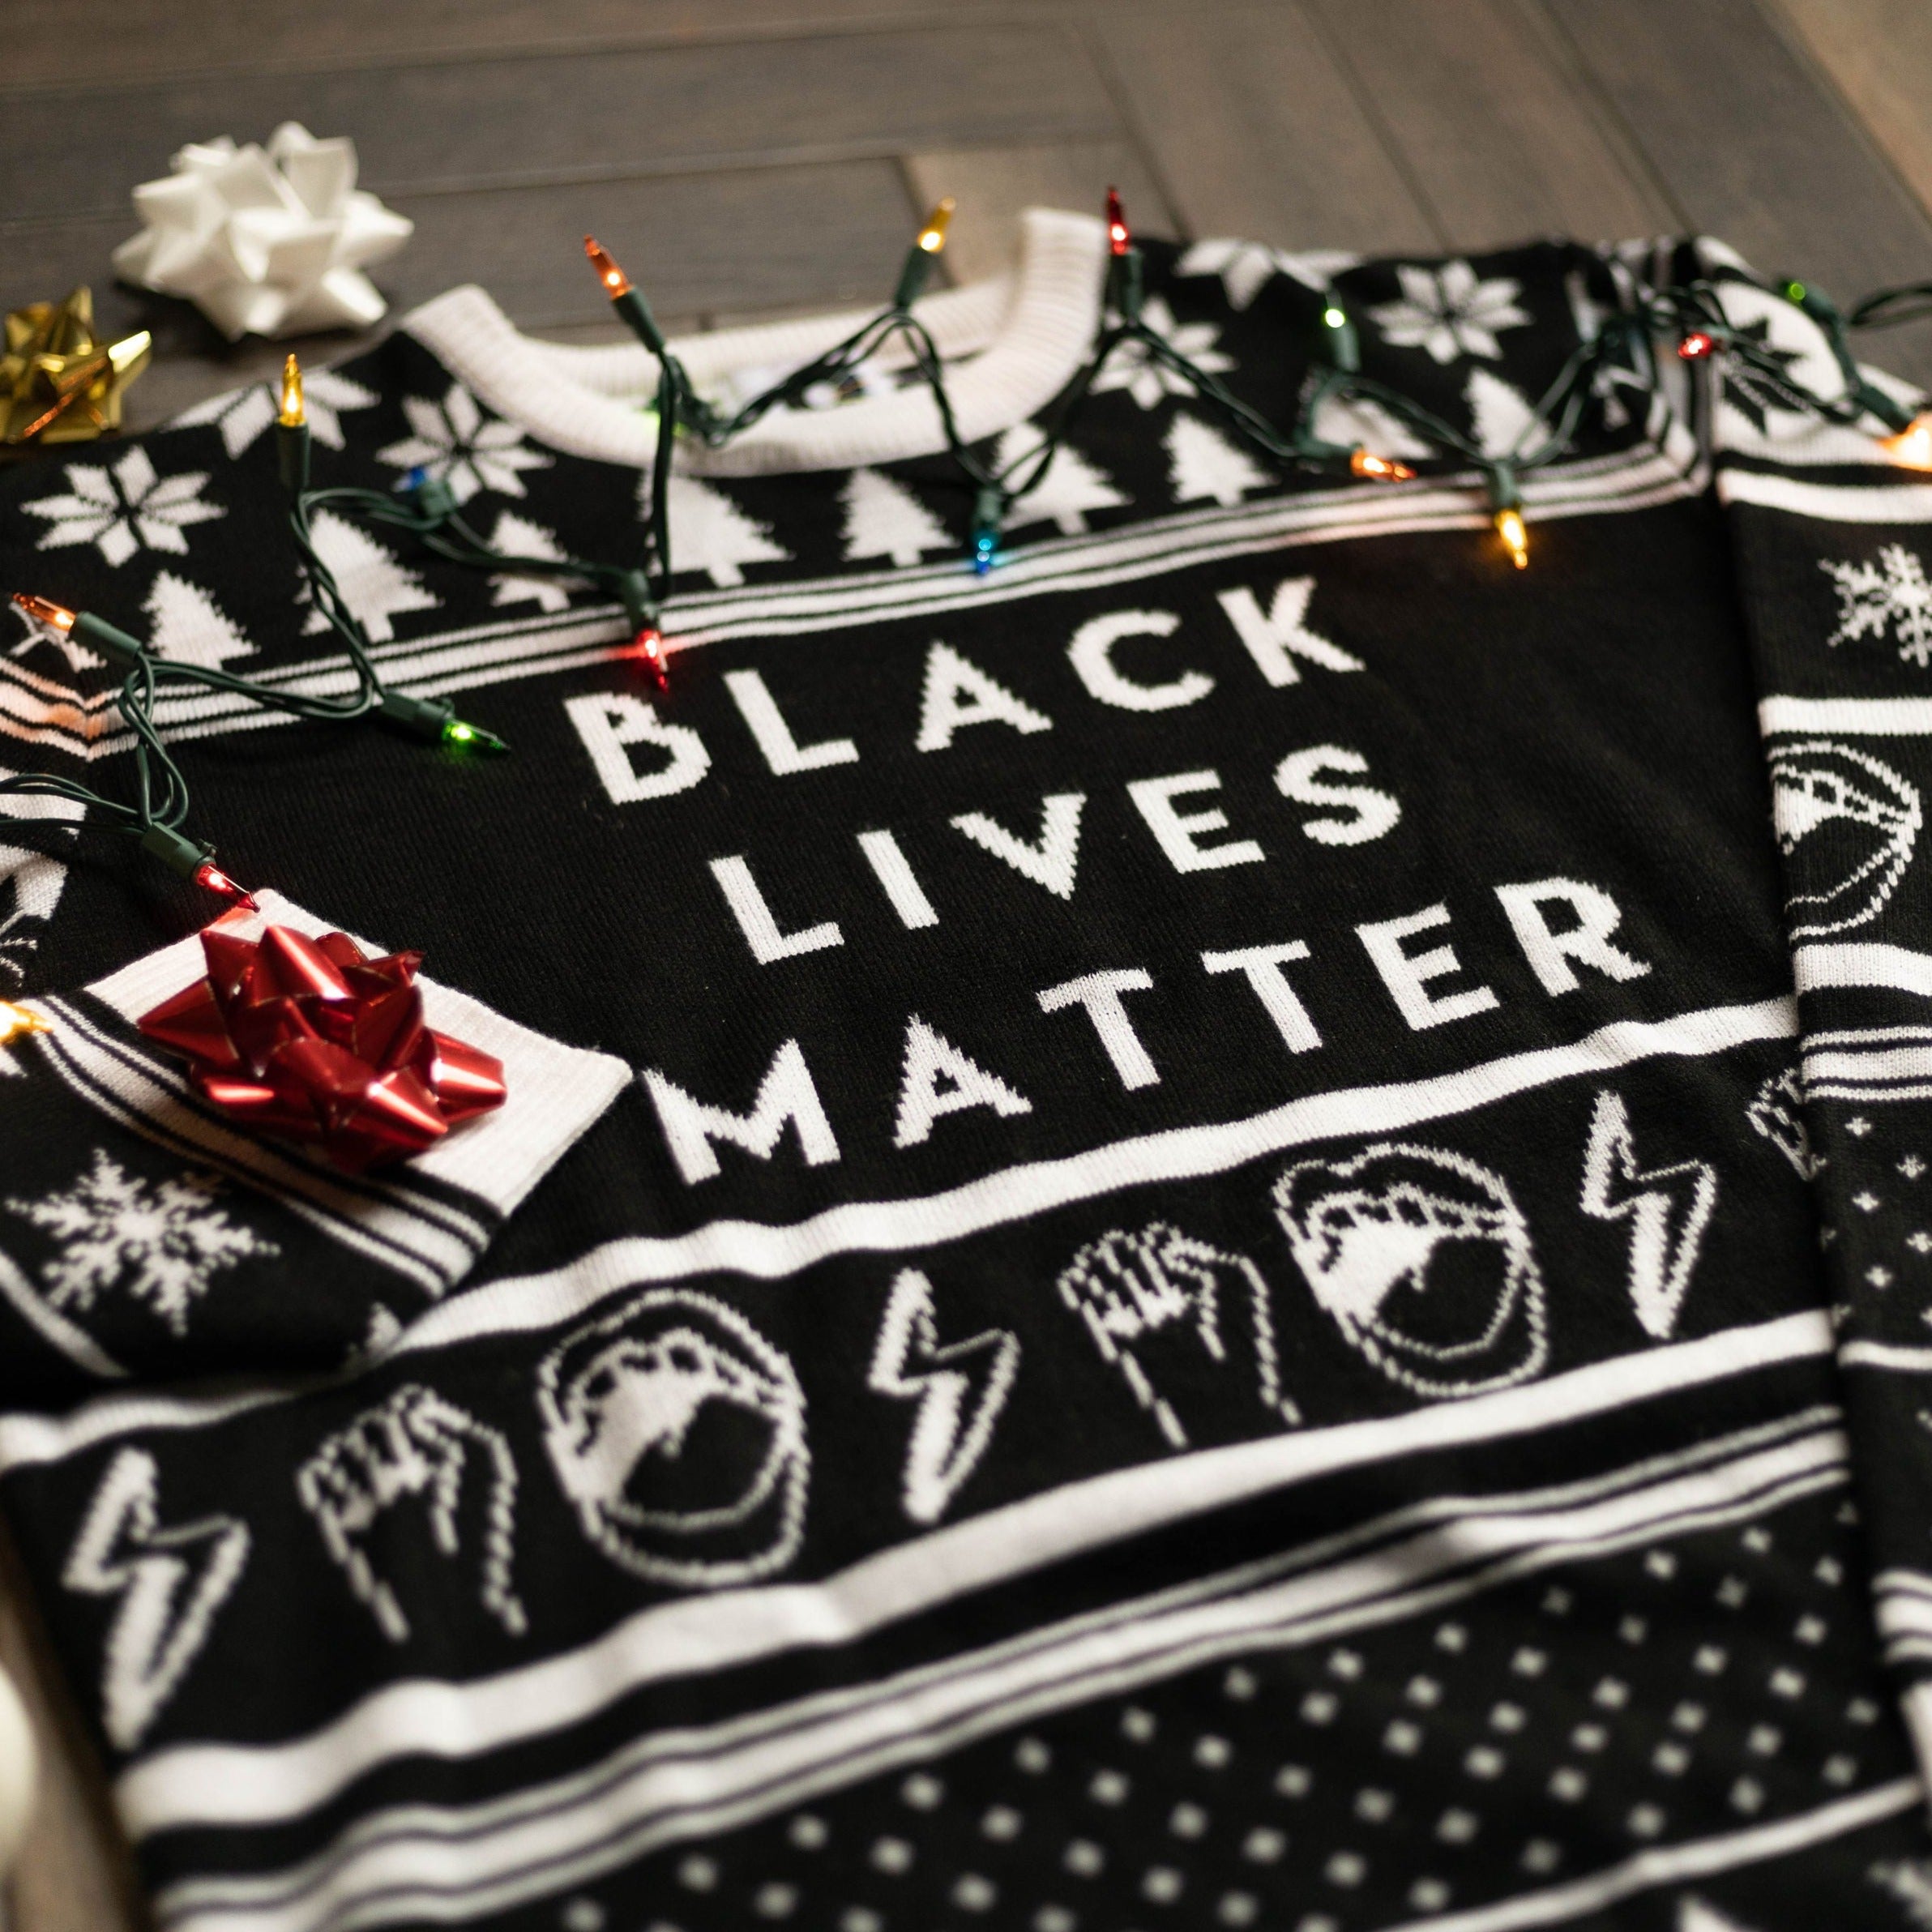 A flat lay of the Black Lives Matter Holiday Sweater. There are colorful holiday lights, ornaments, and bows around it.